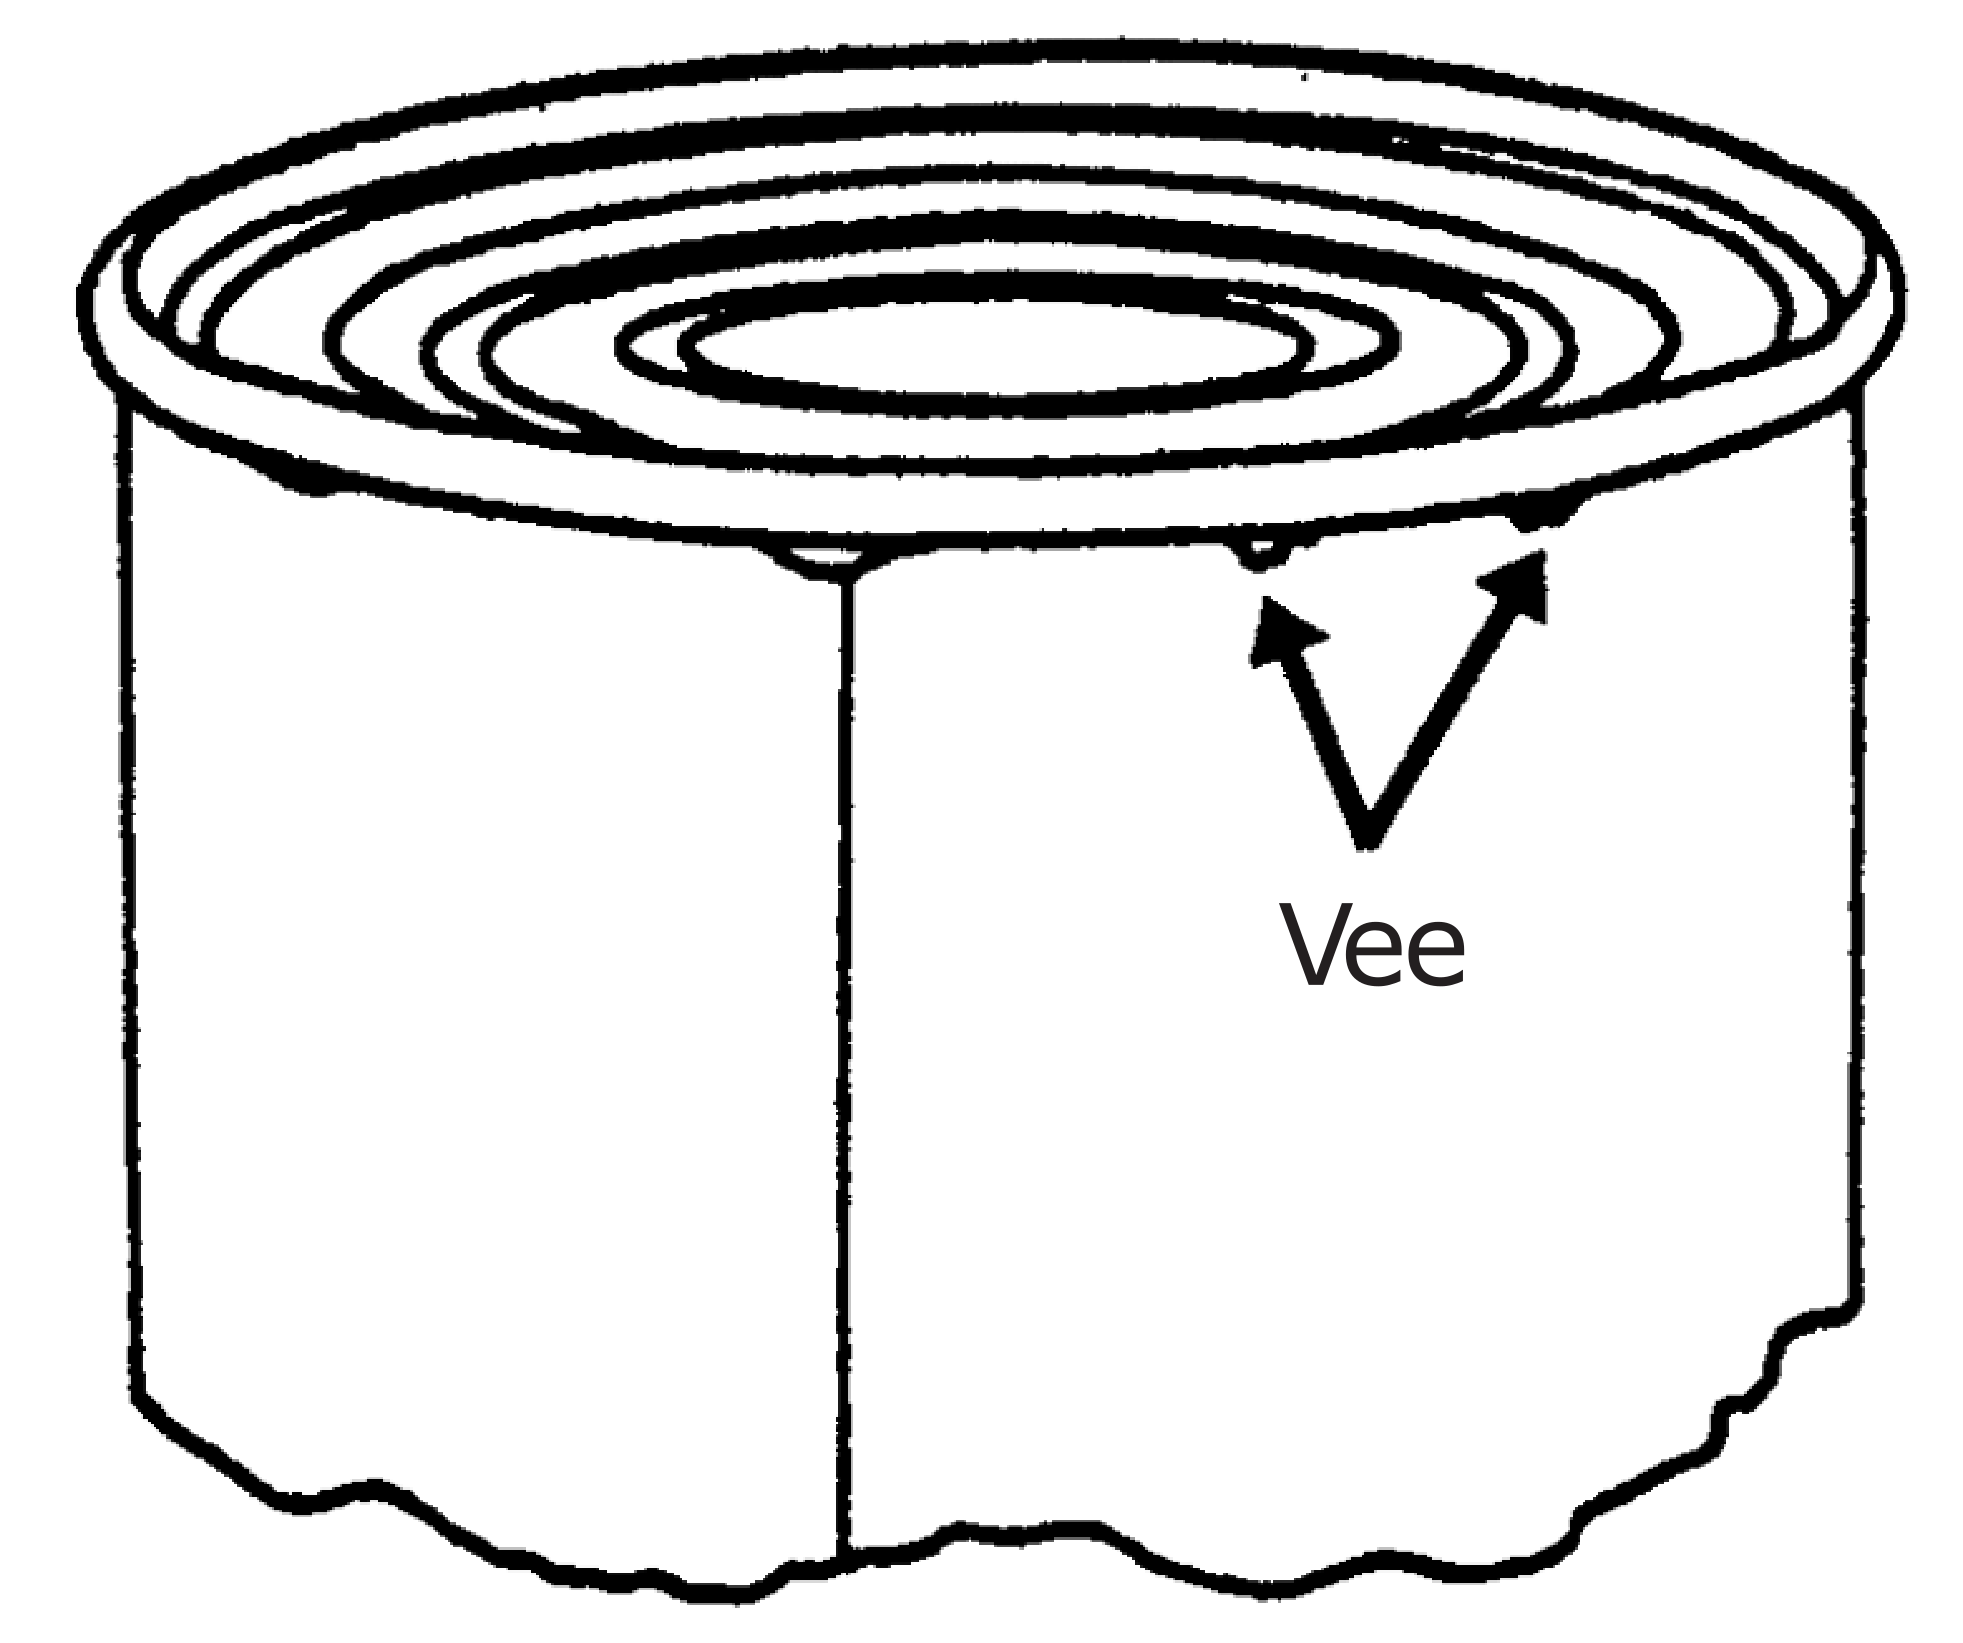 Cylinder with two arrows pointing at spots labeled vee